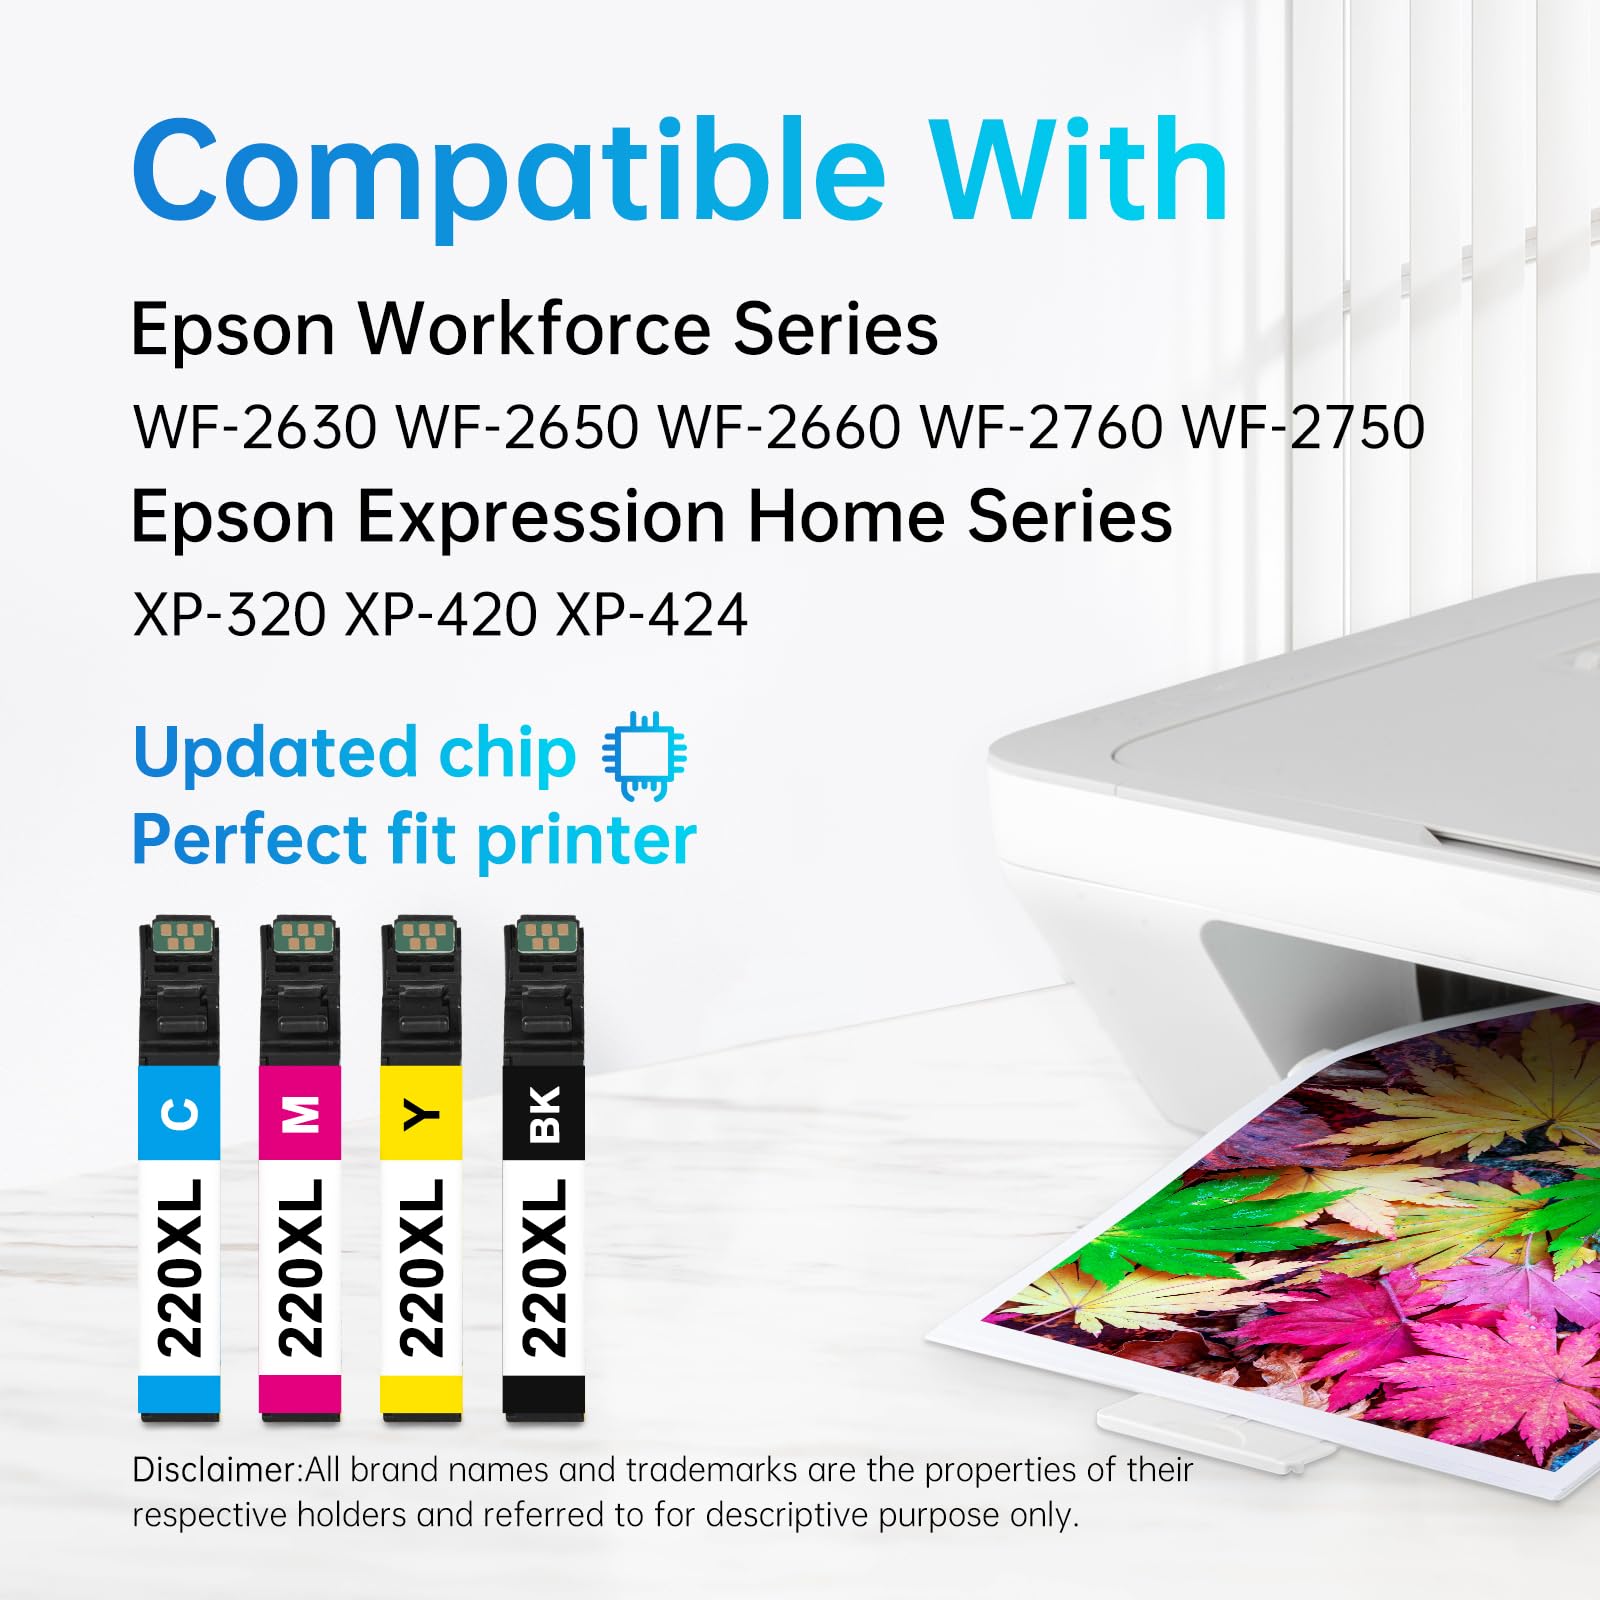 Epson 220XL ink cartridges compatible with Epson Workforce and Expression Home printers, featuring updated chips for seamless compatibility.